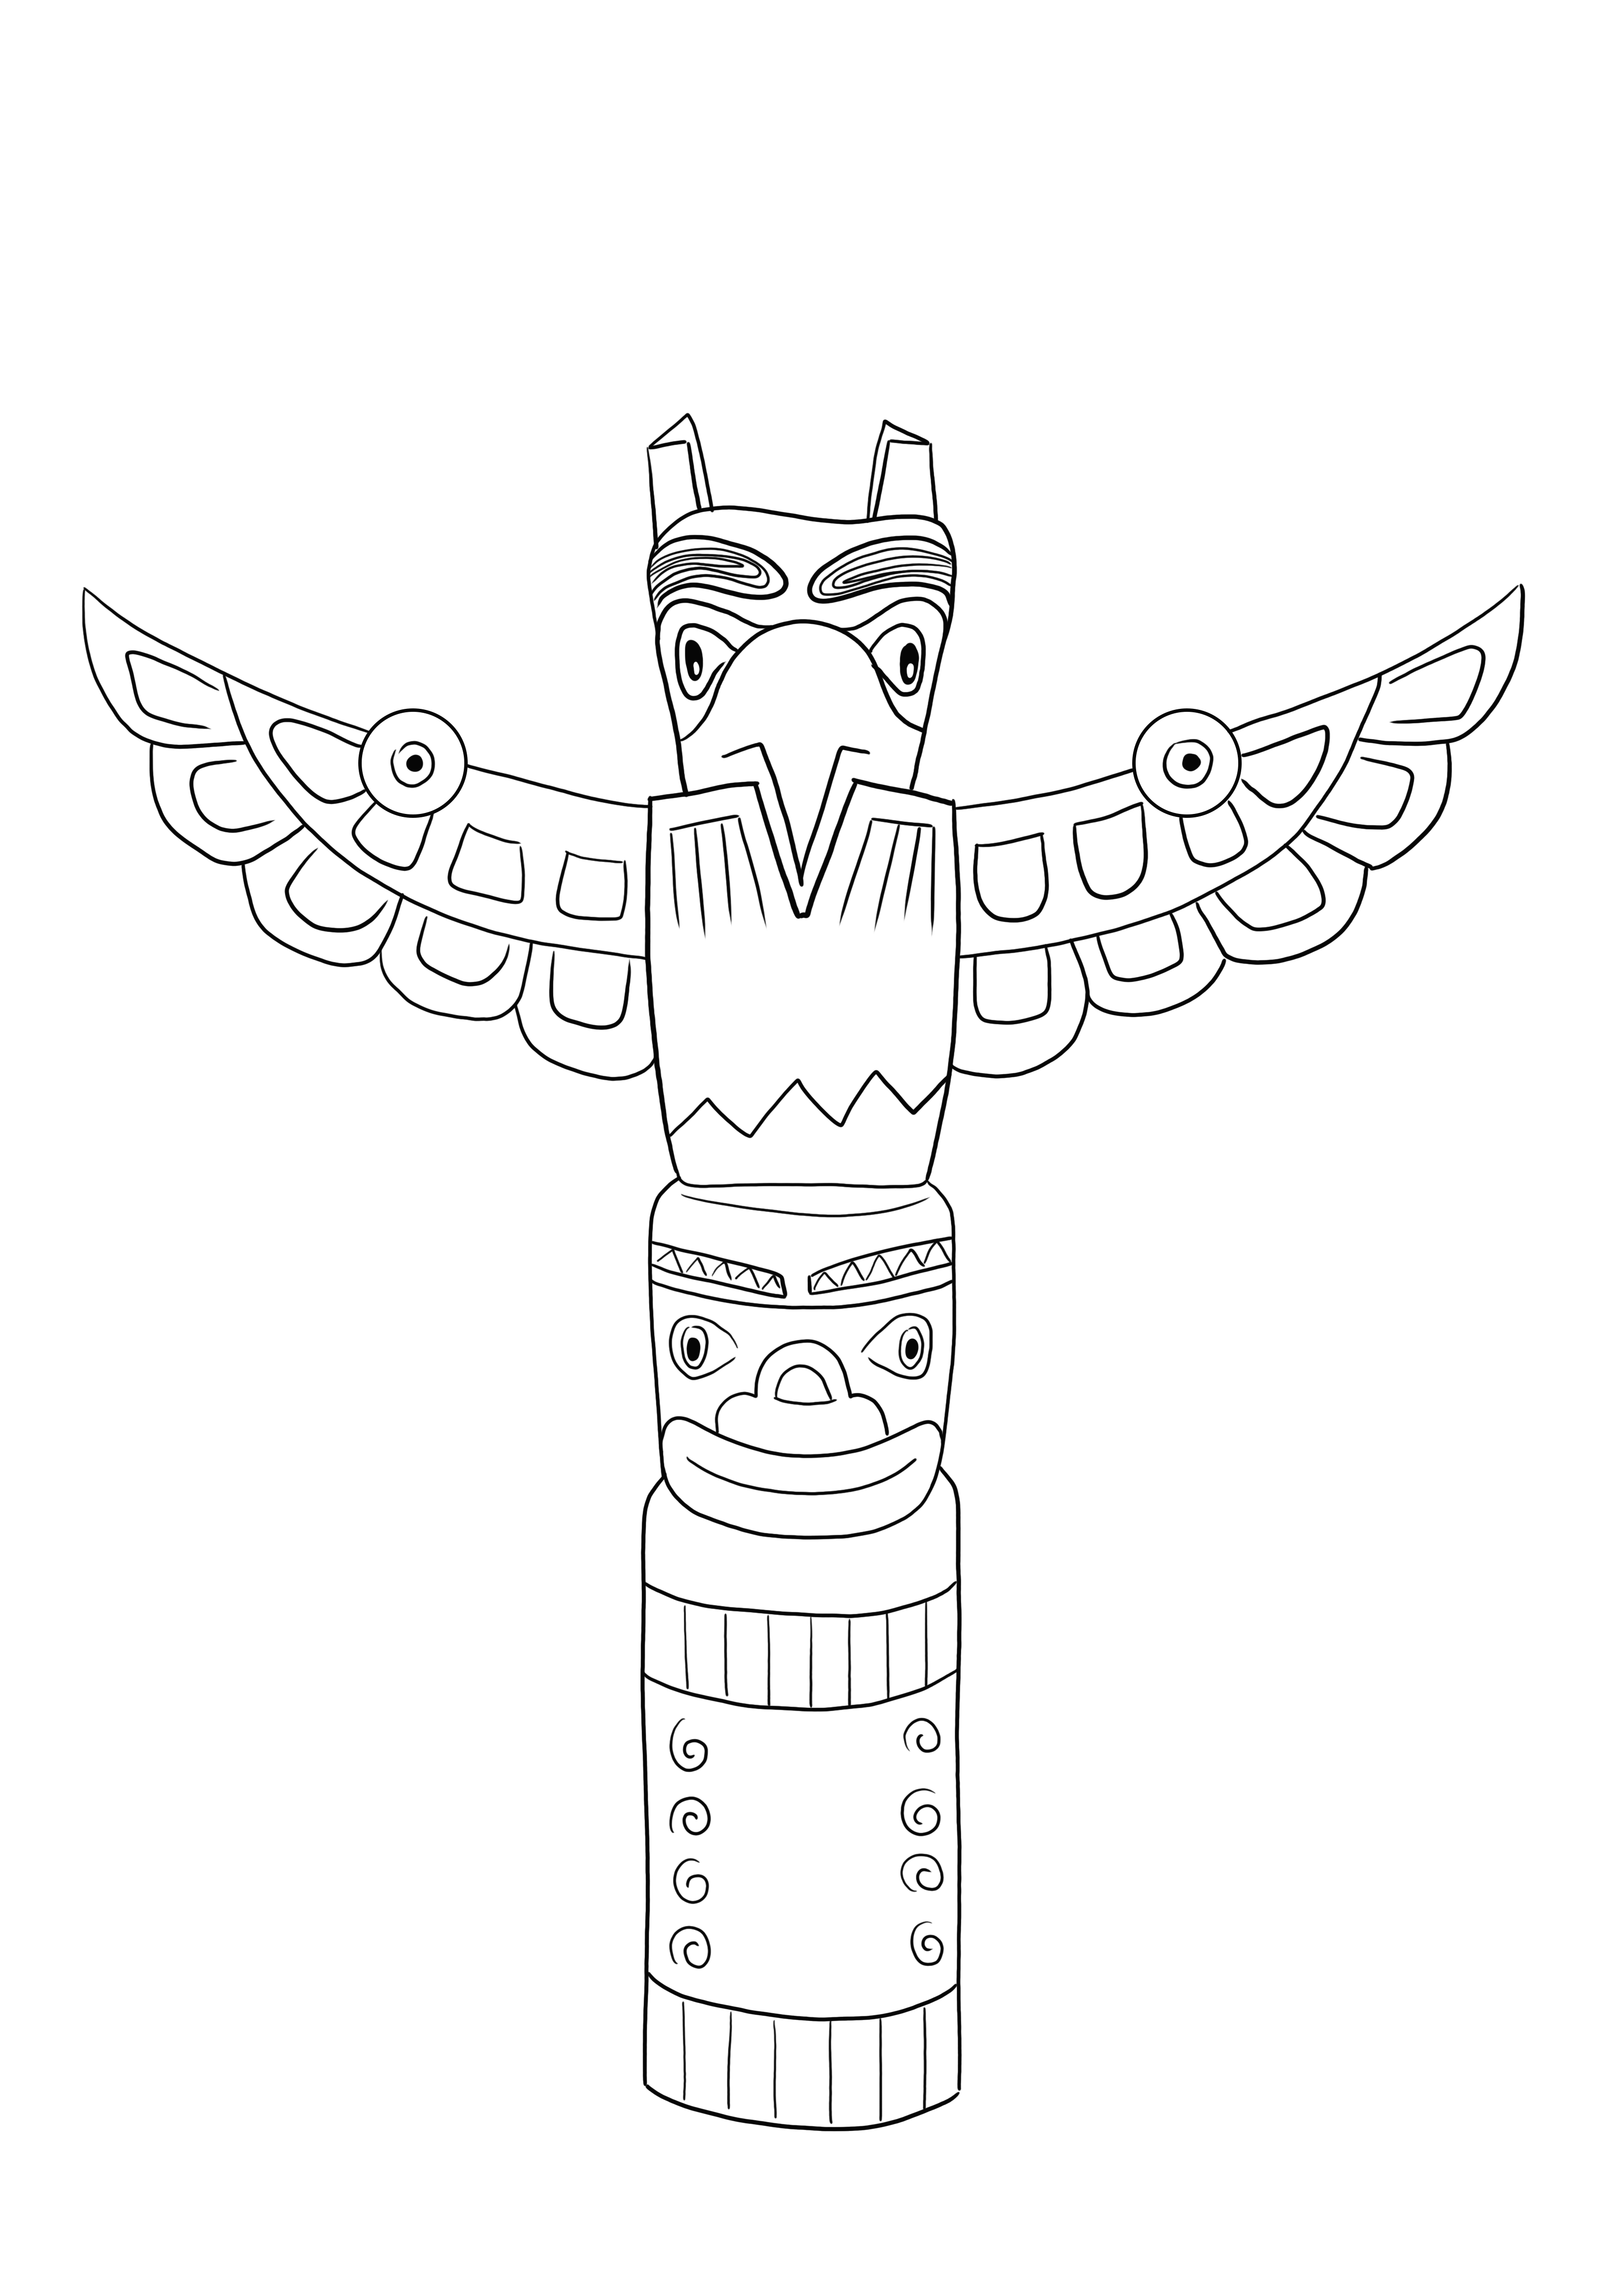 Free coloring of Totem Pole image to download or print for kids to ...